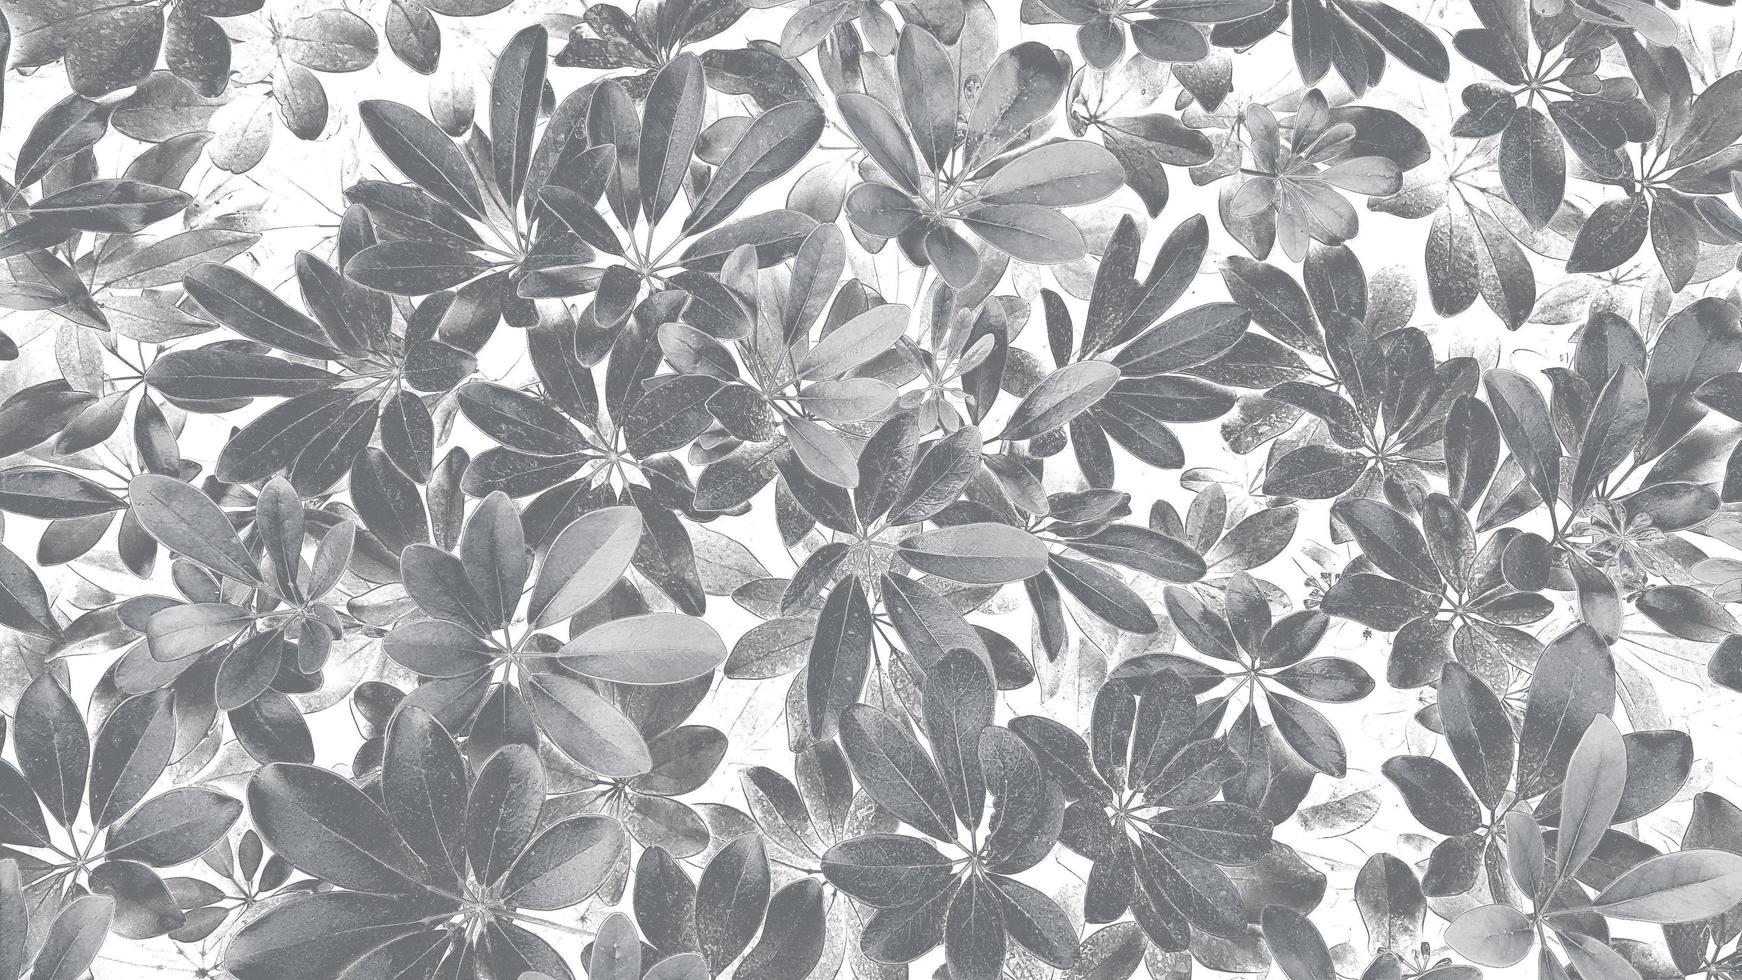 Leaves pattern for background at garden park in black and white or monochrome tone and Illustration style. Beauty of Nature, Growth, Plant and Natural wallpaper concept photo